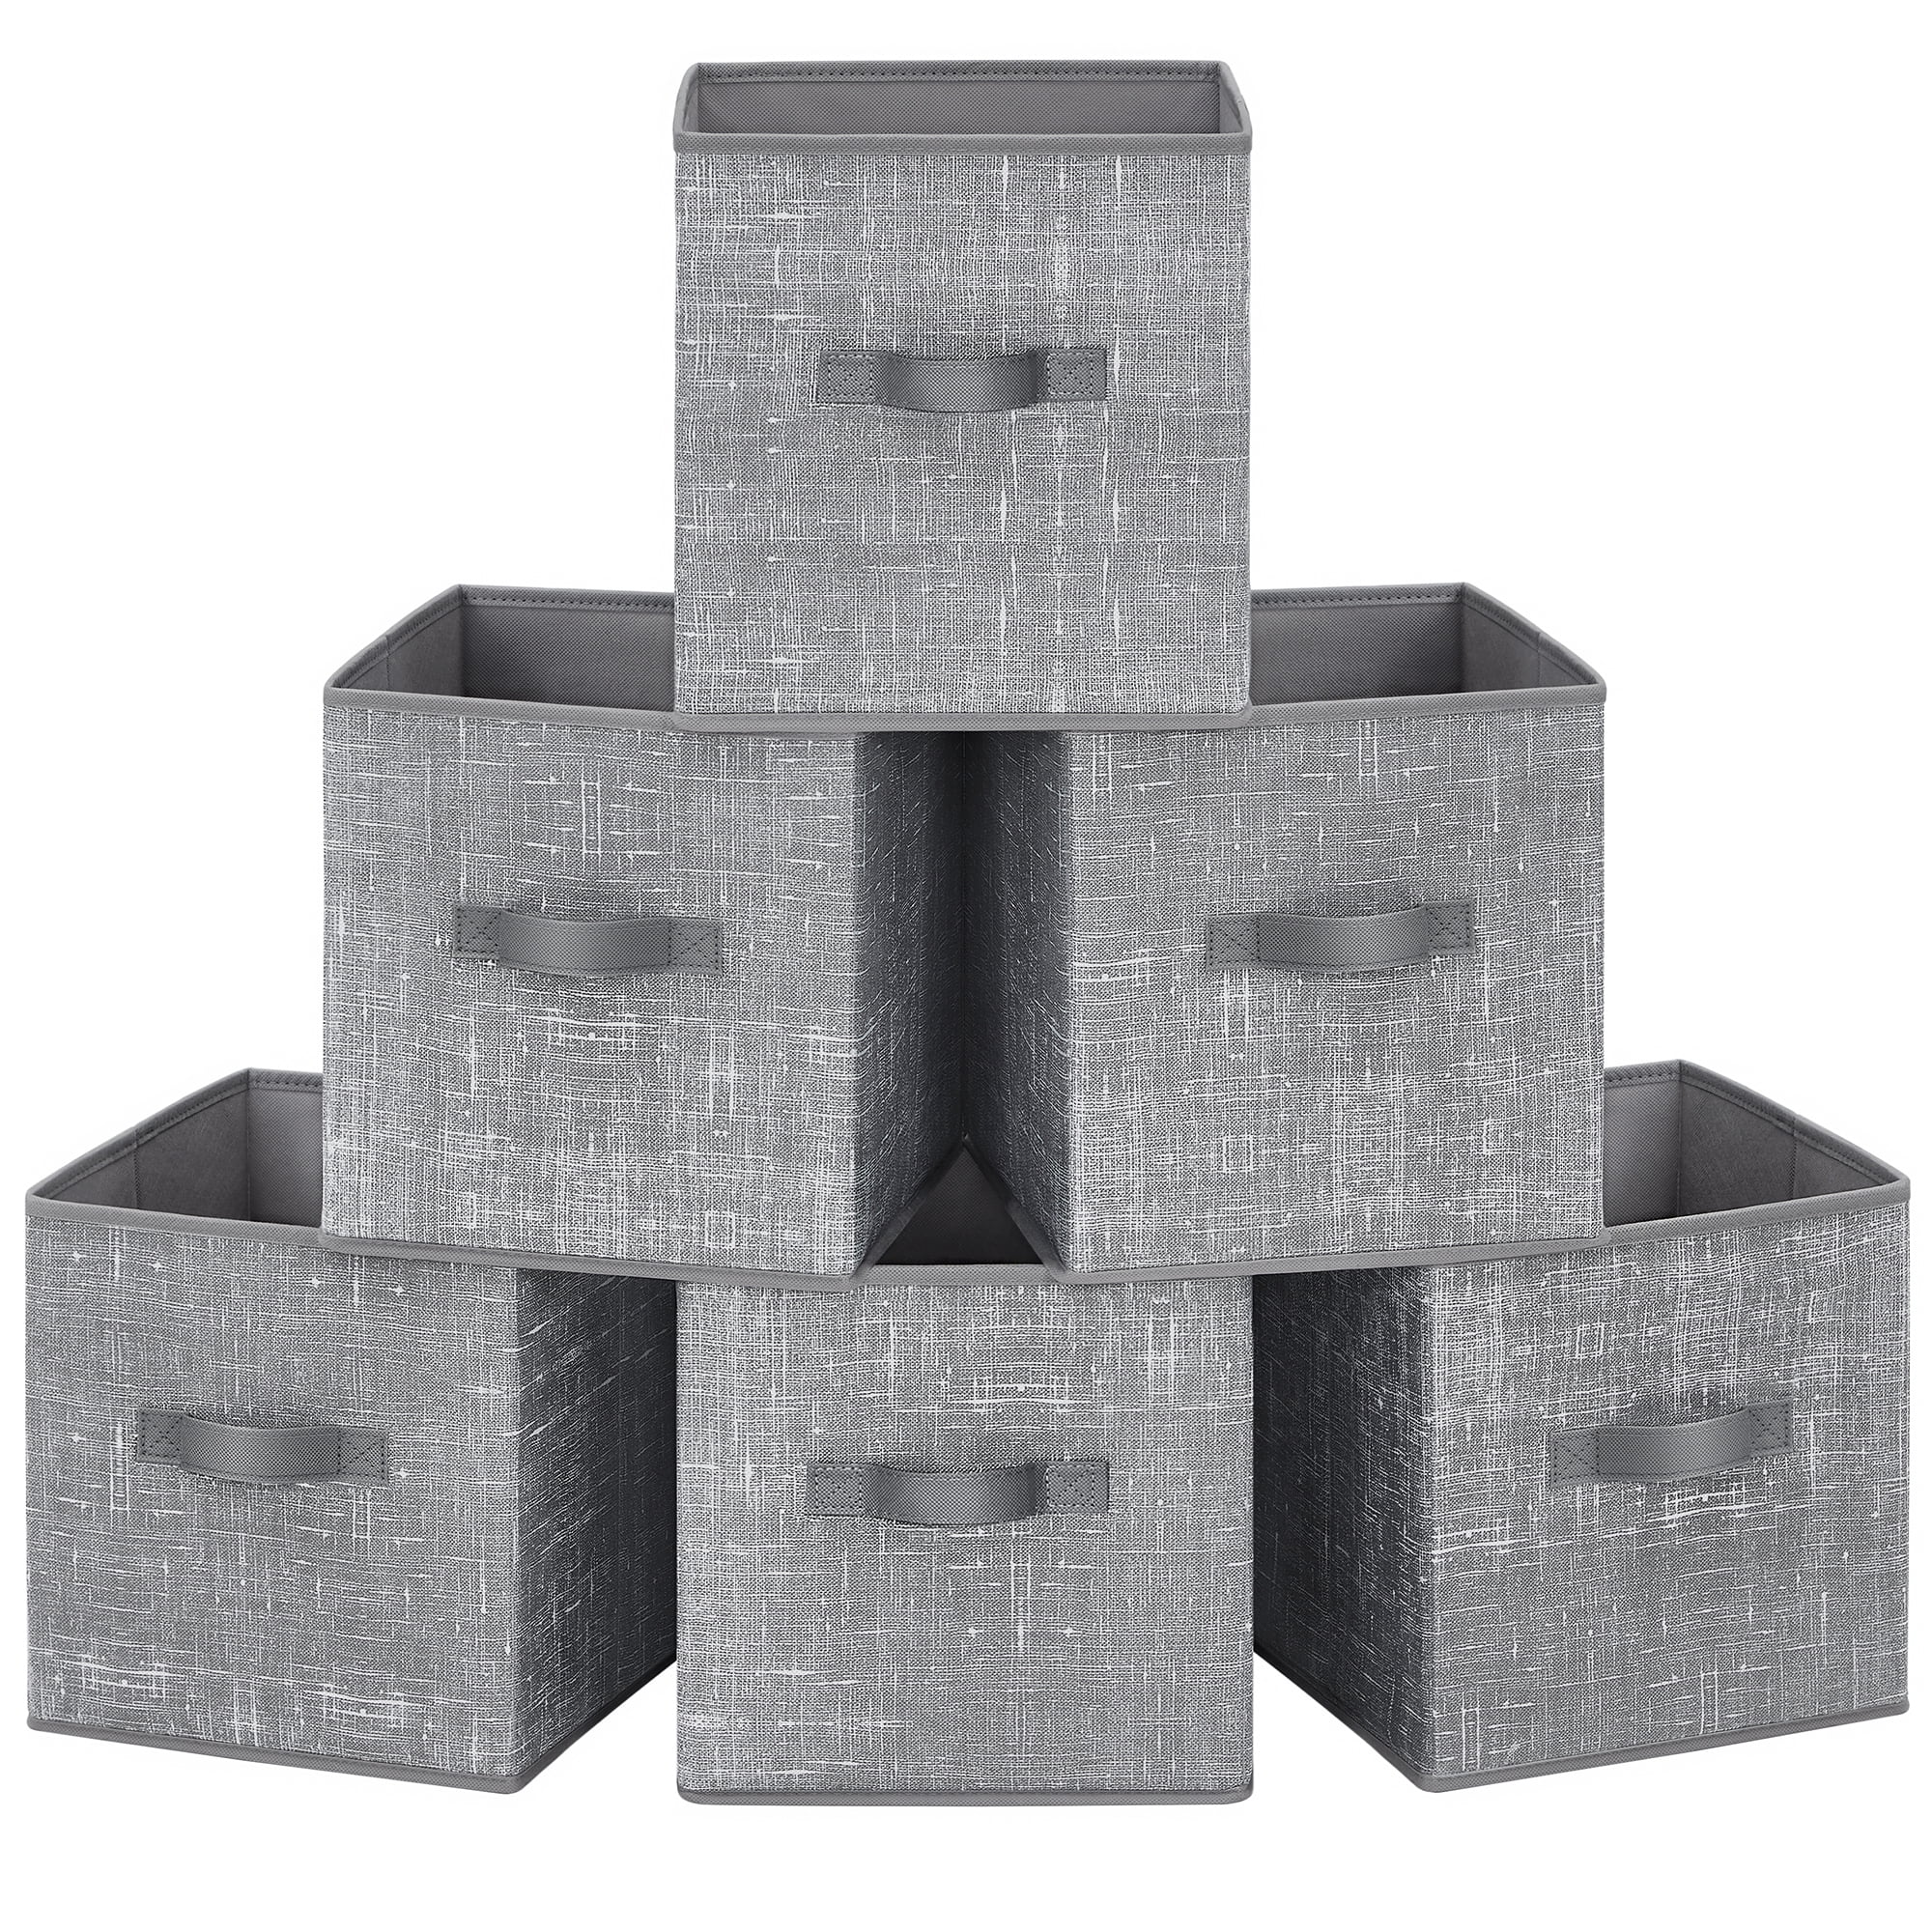 SONGMICS 6 Pack Storage Cubes 11-Inch Non-Woven Fabric Bins with Double ...